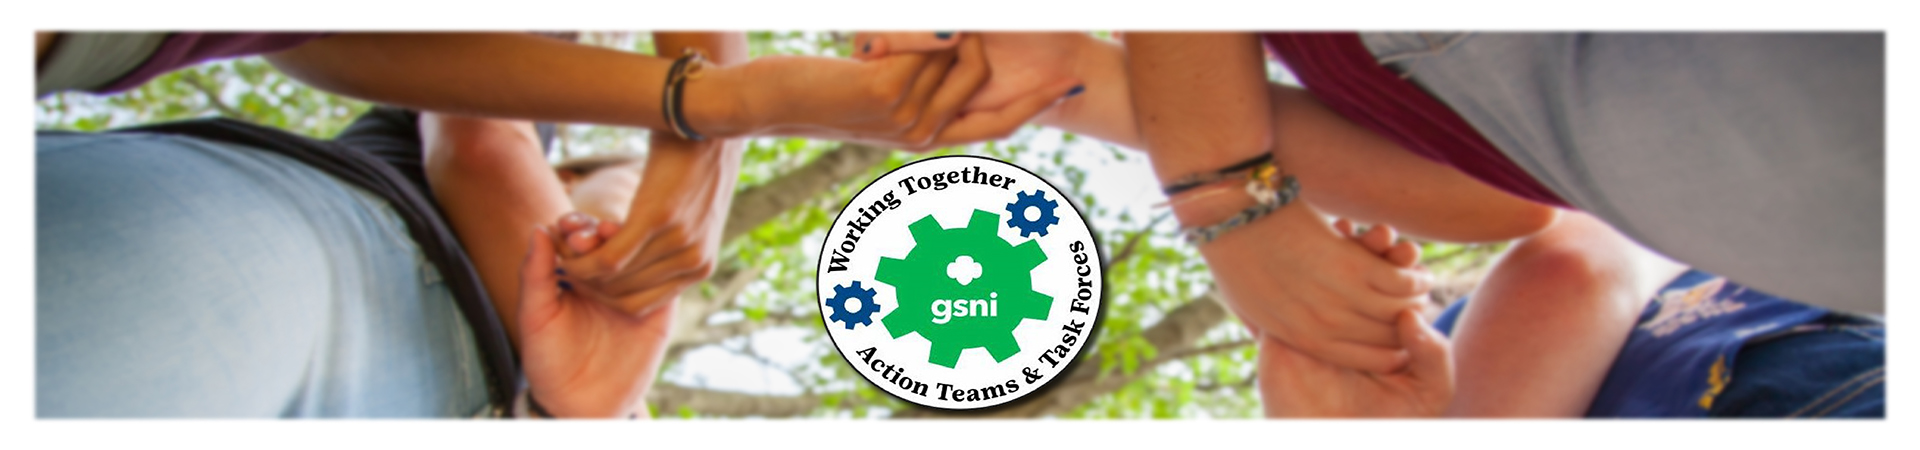  Action team logo with girls holding hands 